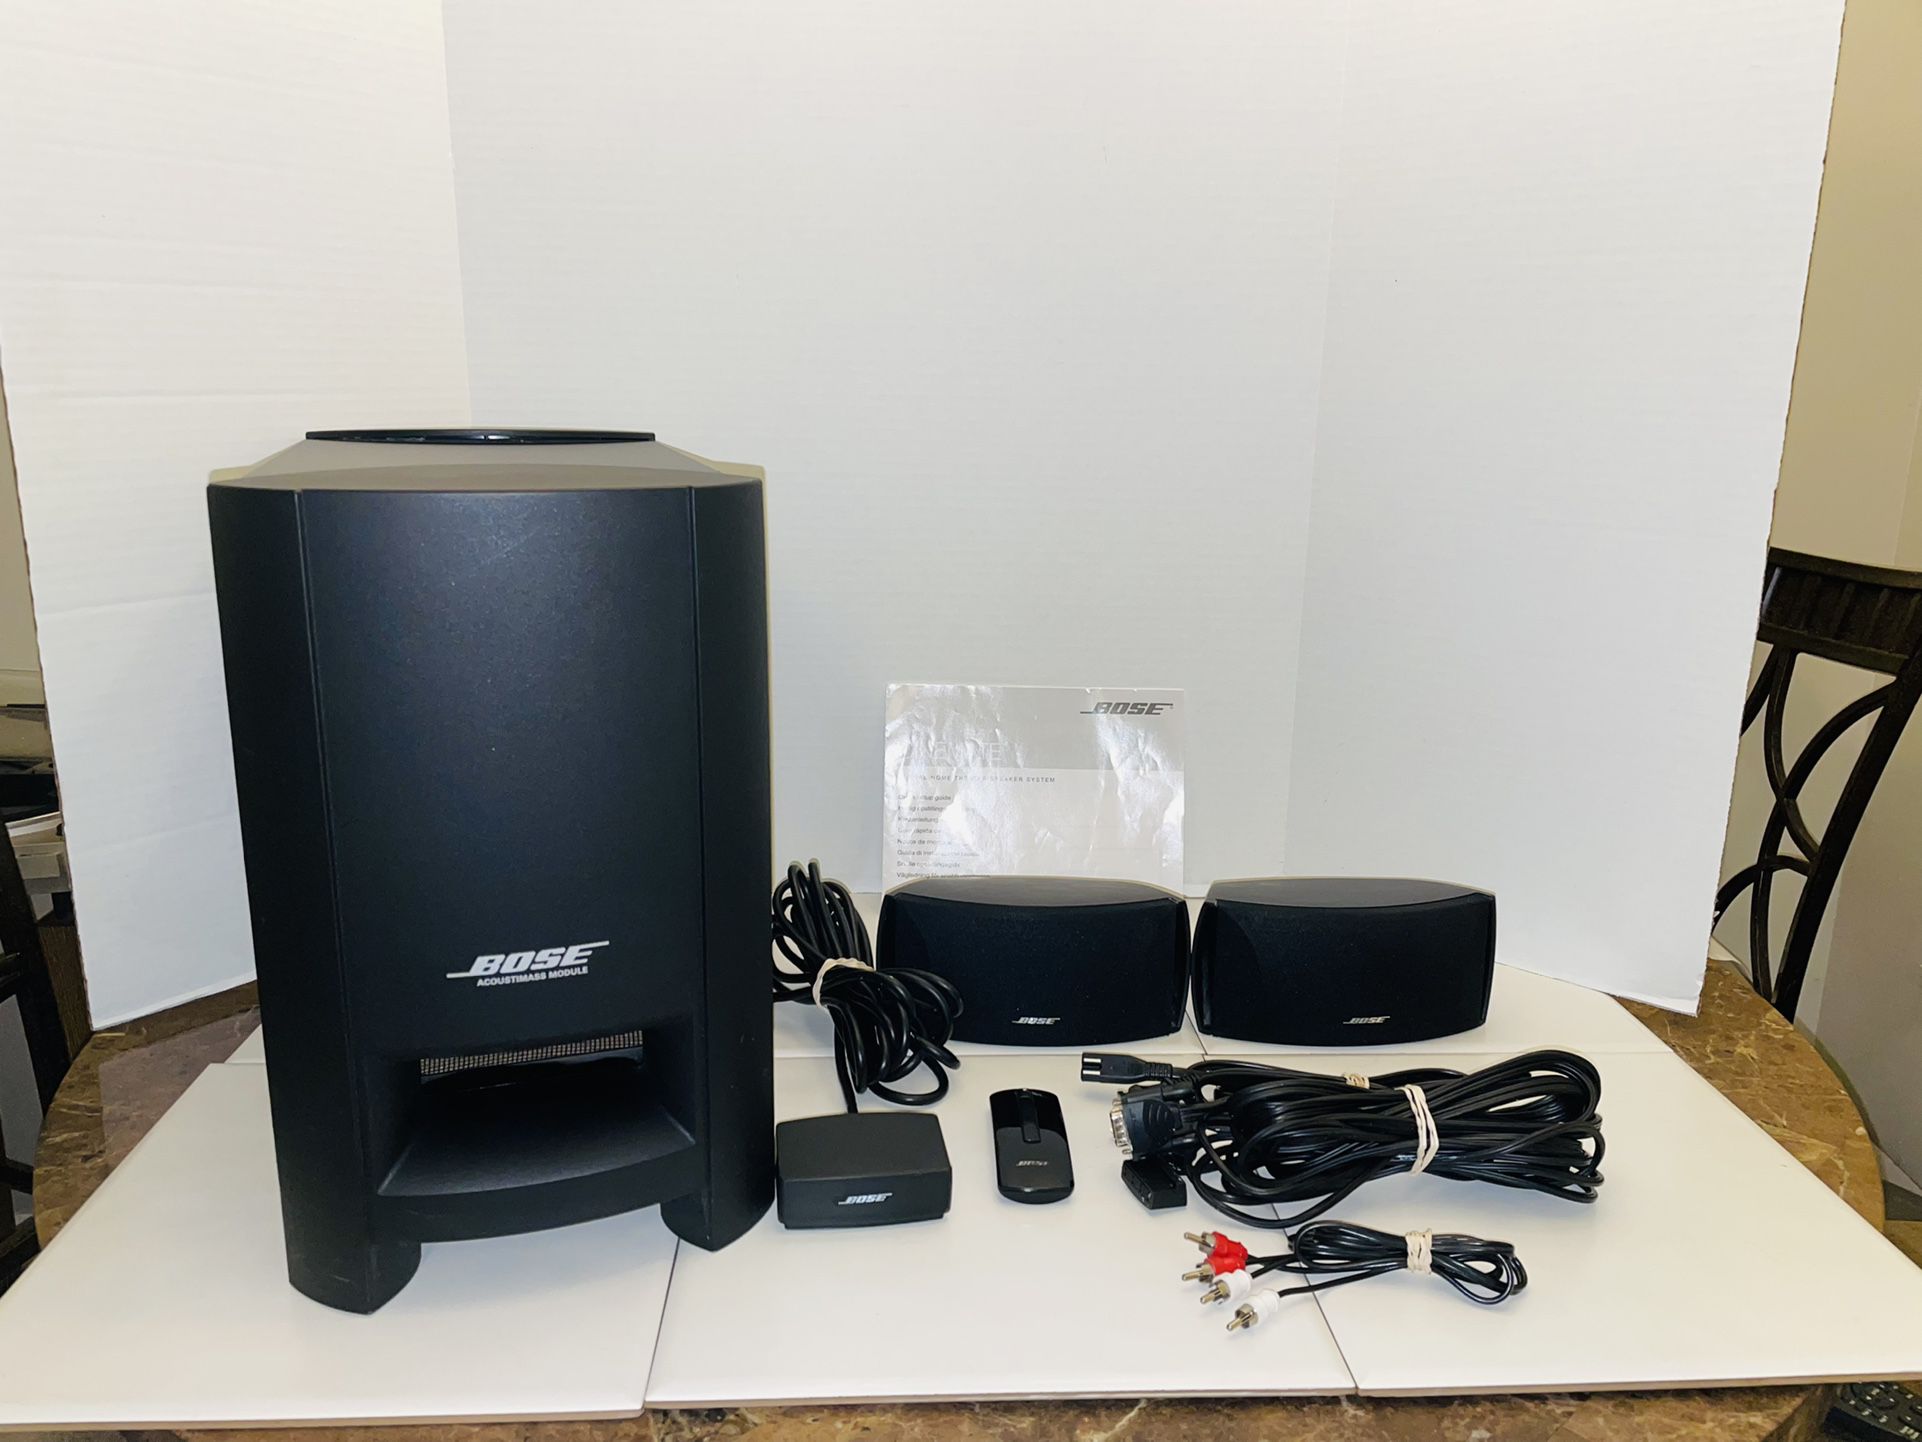 Bose CineMate Series II Complete Digital 2.1 Channel Home Theater Speakers & Subwoofer System